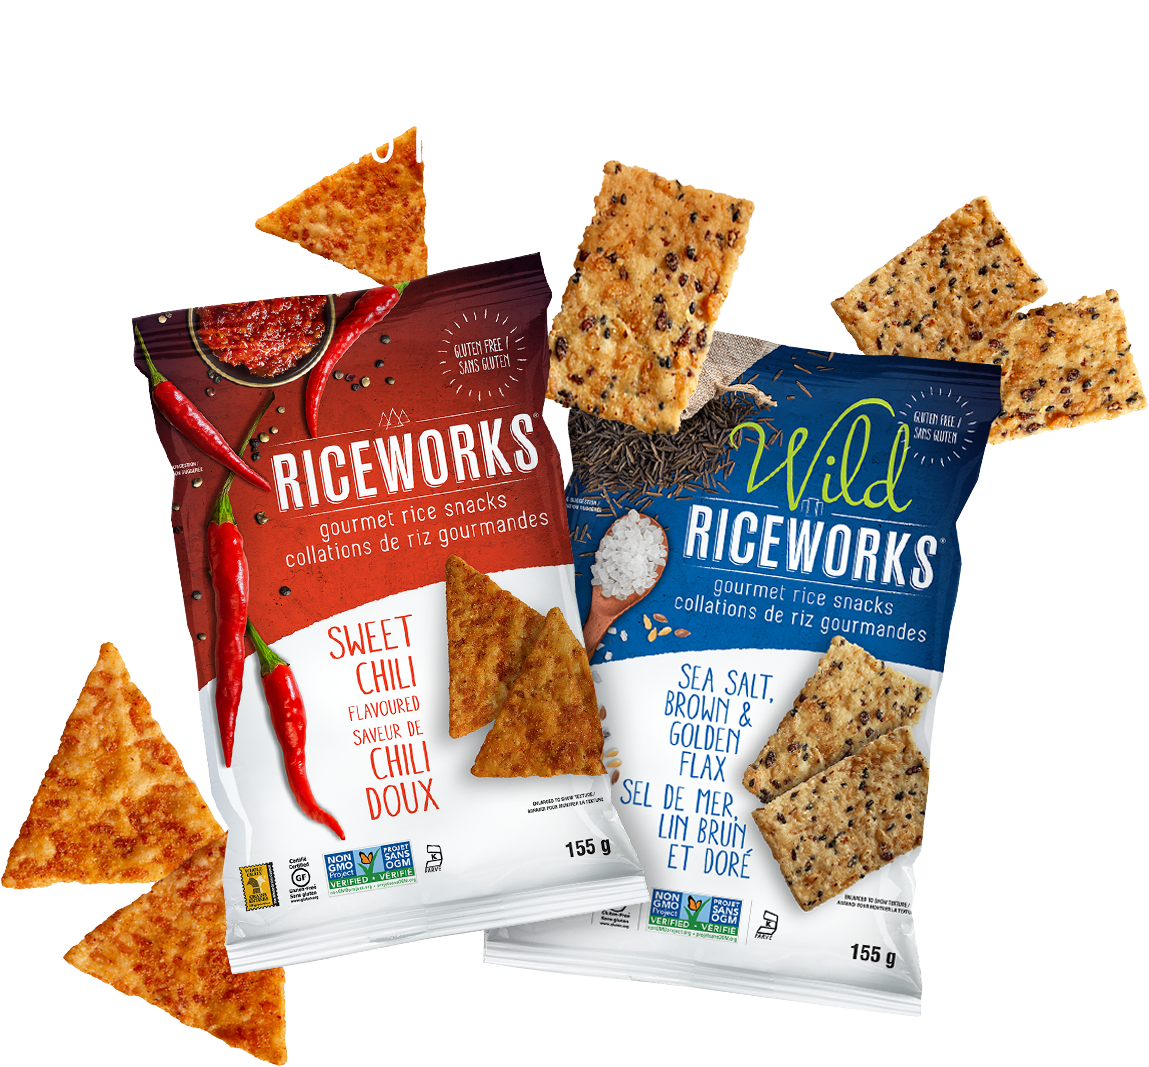 Riceworks Rice Chips are Crunchy Nutritious Deliciousness!